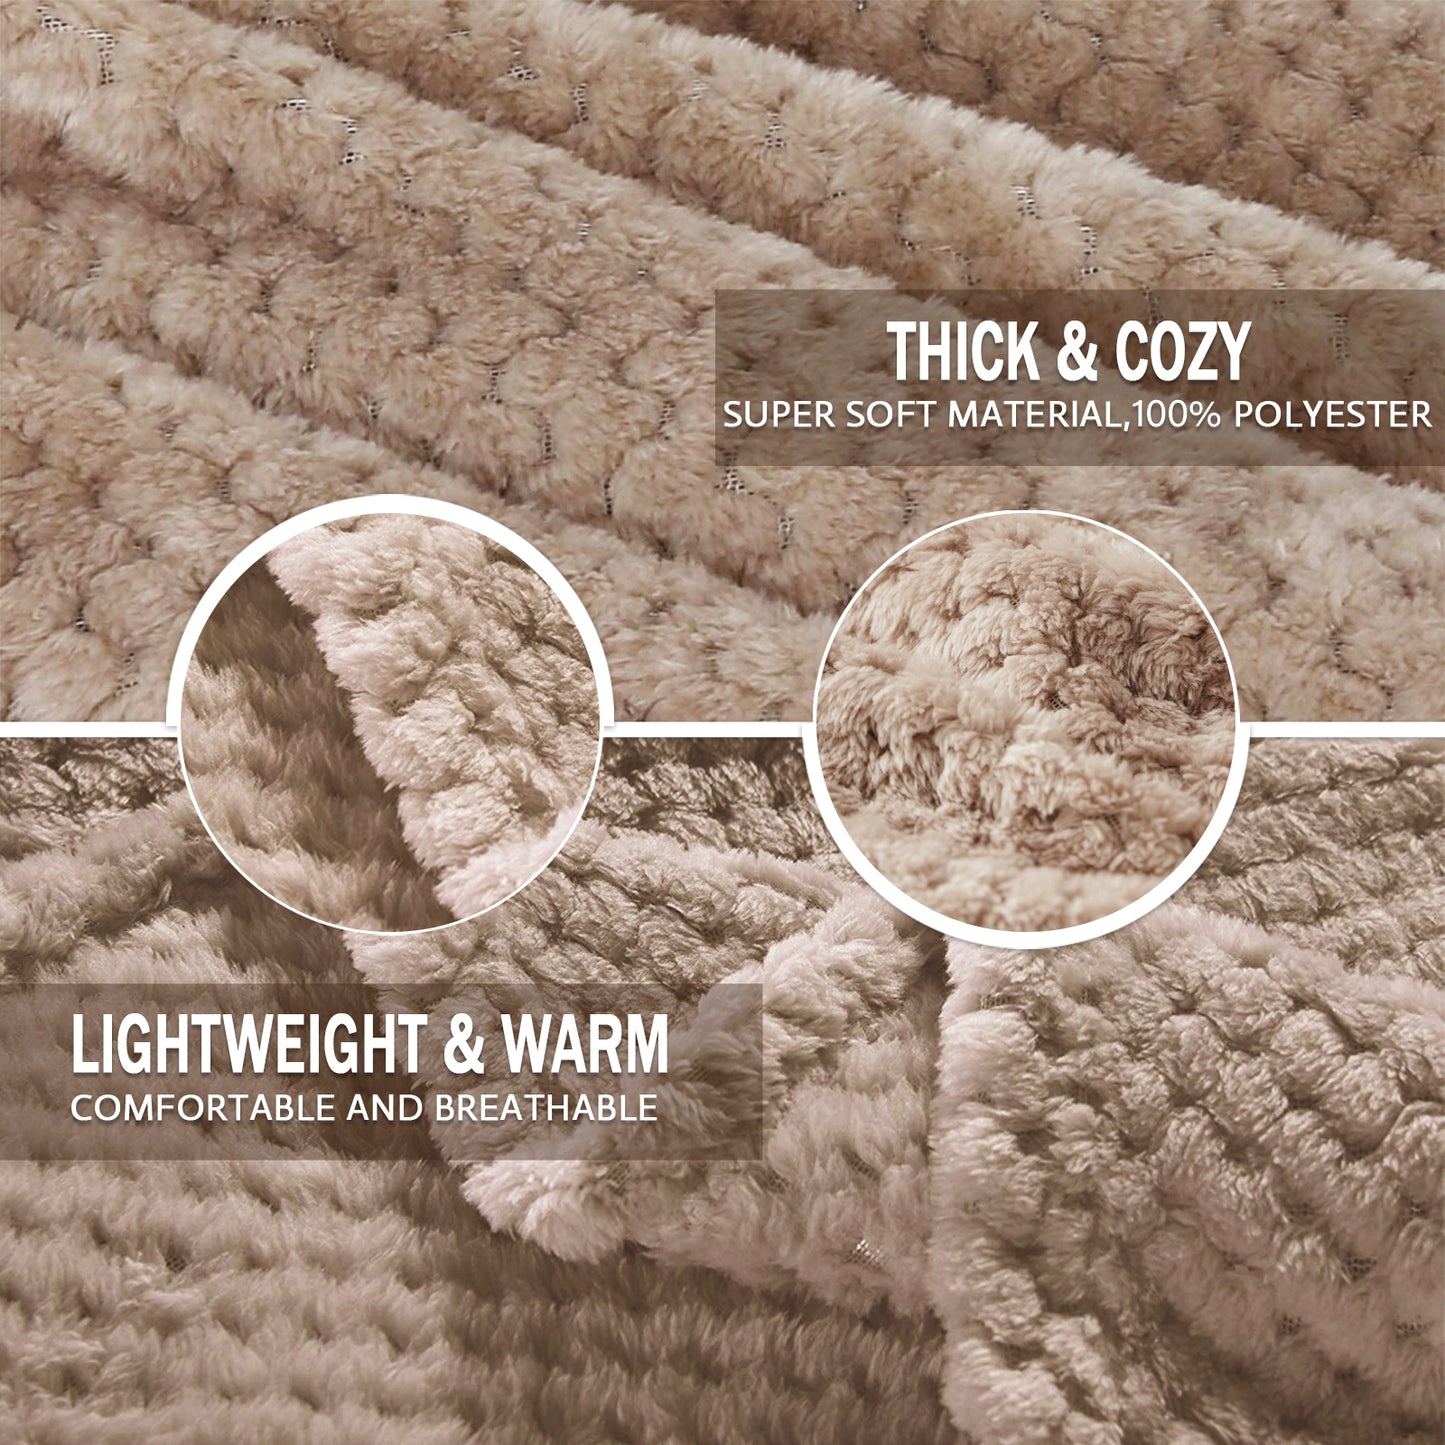 Exclusivo Mezcla Waffle Textured Extra Large Fleece Blanket, Super Soft and Warm Throw Blanket for Couch, Sofa and Bed (Camel, 50x70 inches)-Cozy, Fuzzy and Lightweight